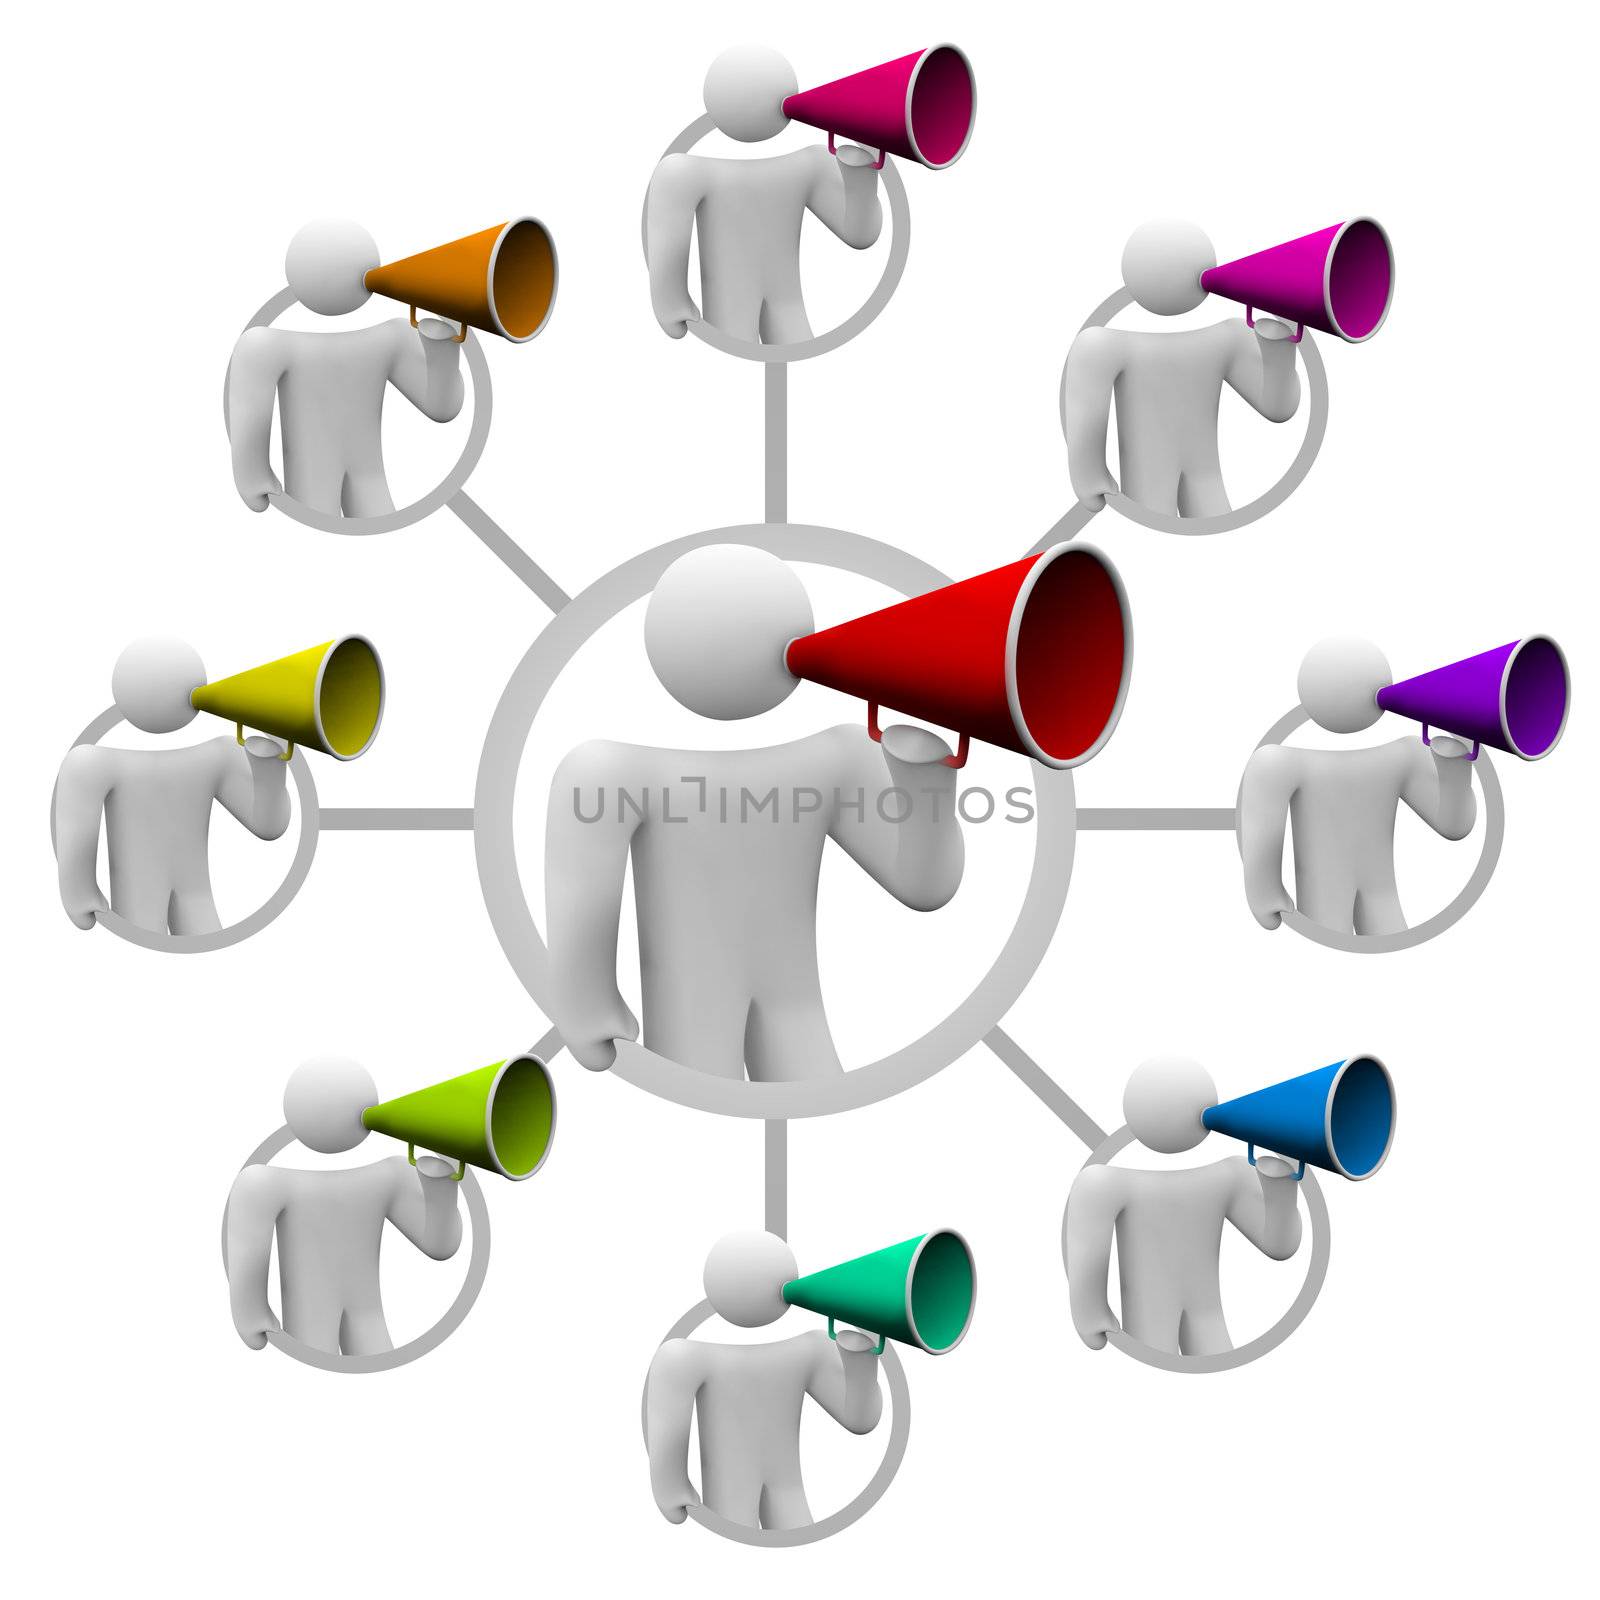 Illustration of how making one person sharing information can spread through a gossip network of many people spreading a rumor